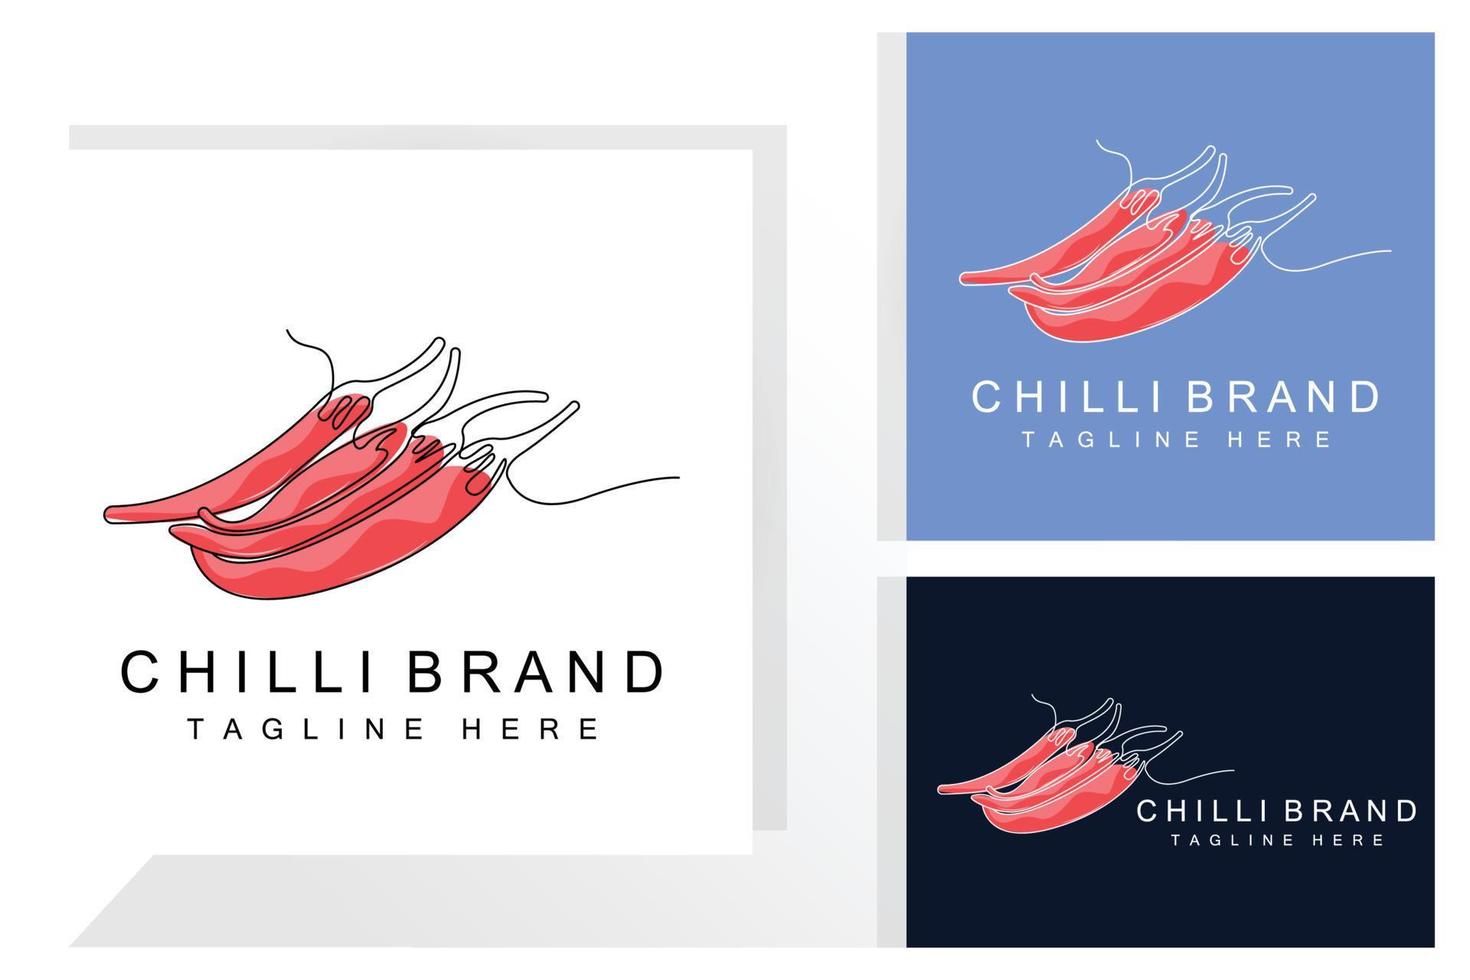 Spicy Chili Logo Design, Red Vegetable Illustration, Kitchen Ingredients, Hot Chili Vector Brand Products